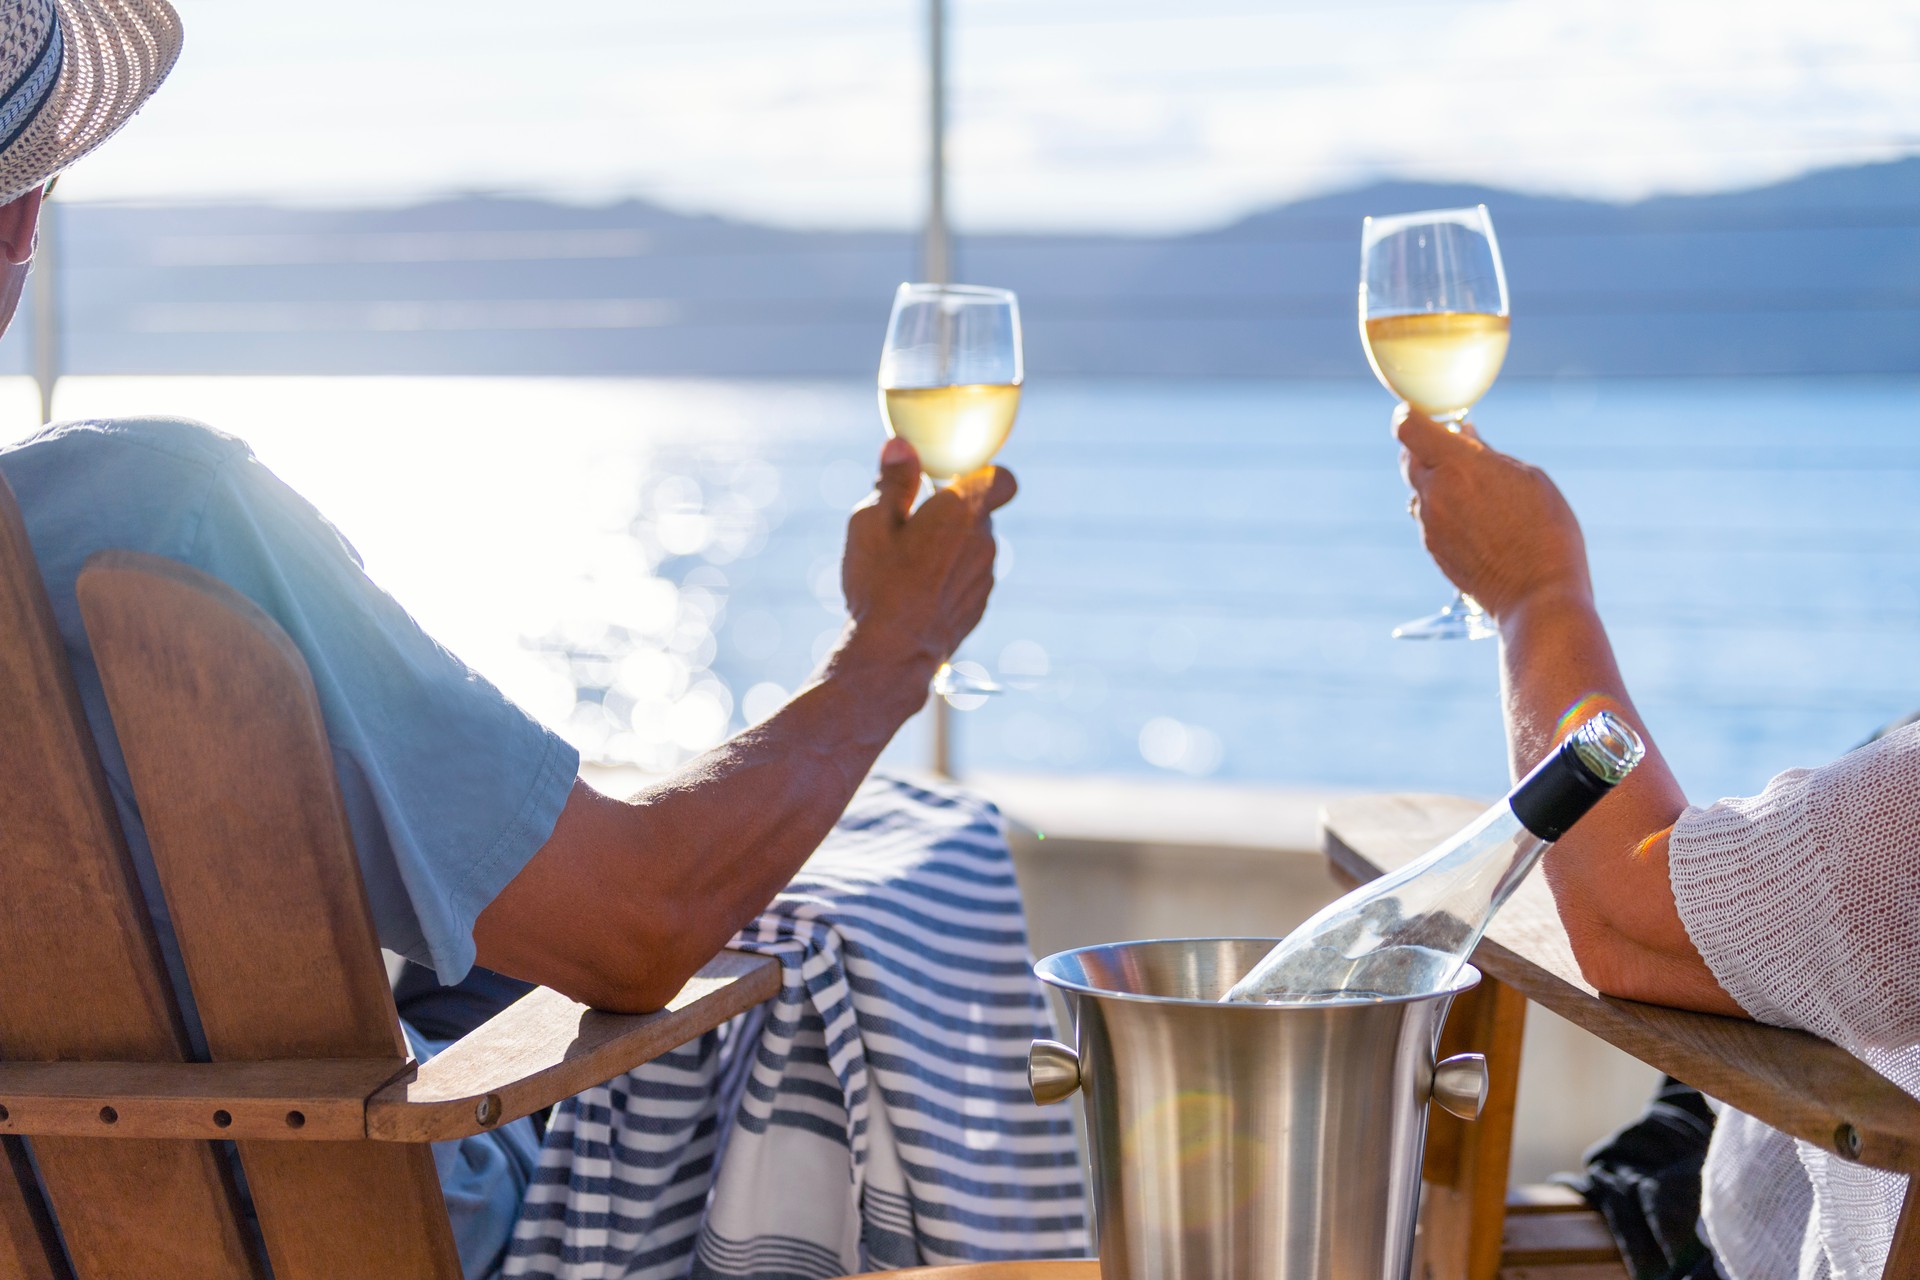 Couple relaxing and drinking wine on deck chairs in an over water bungalow.